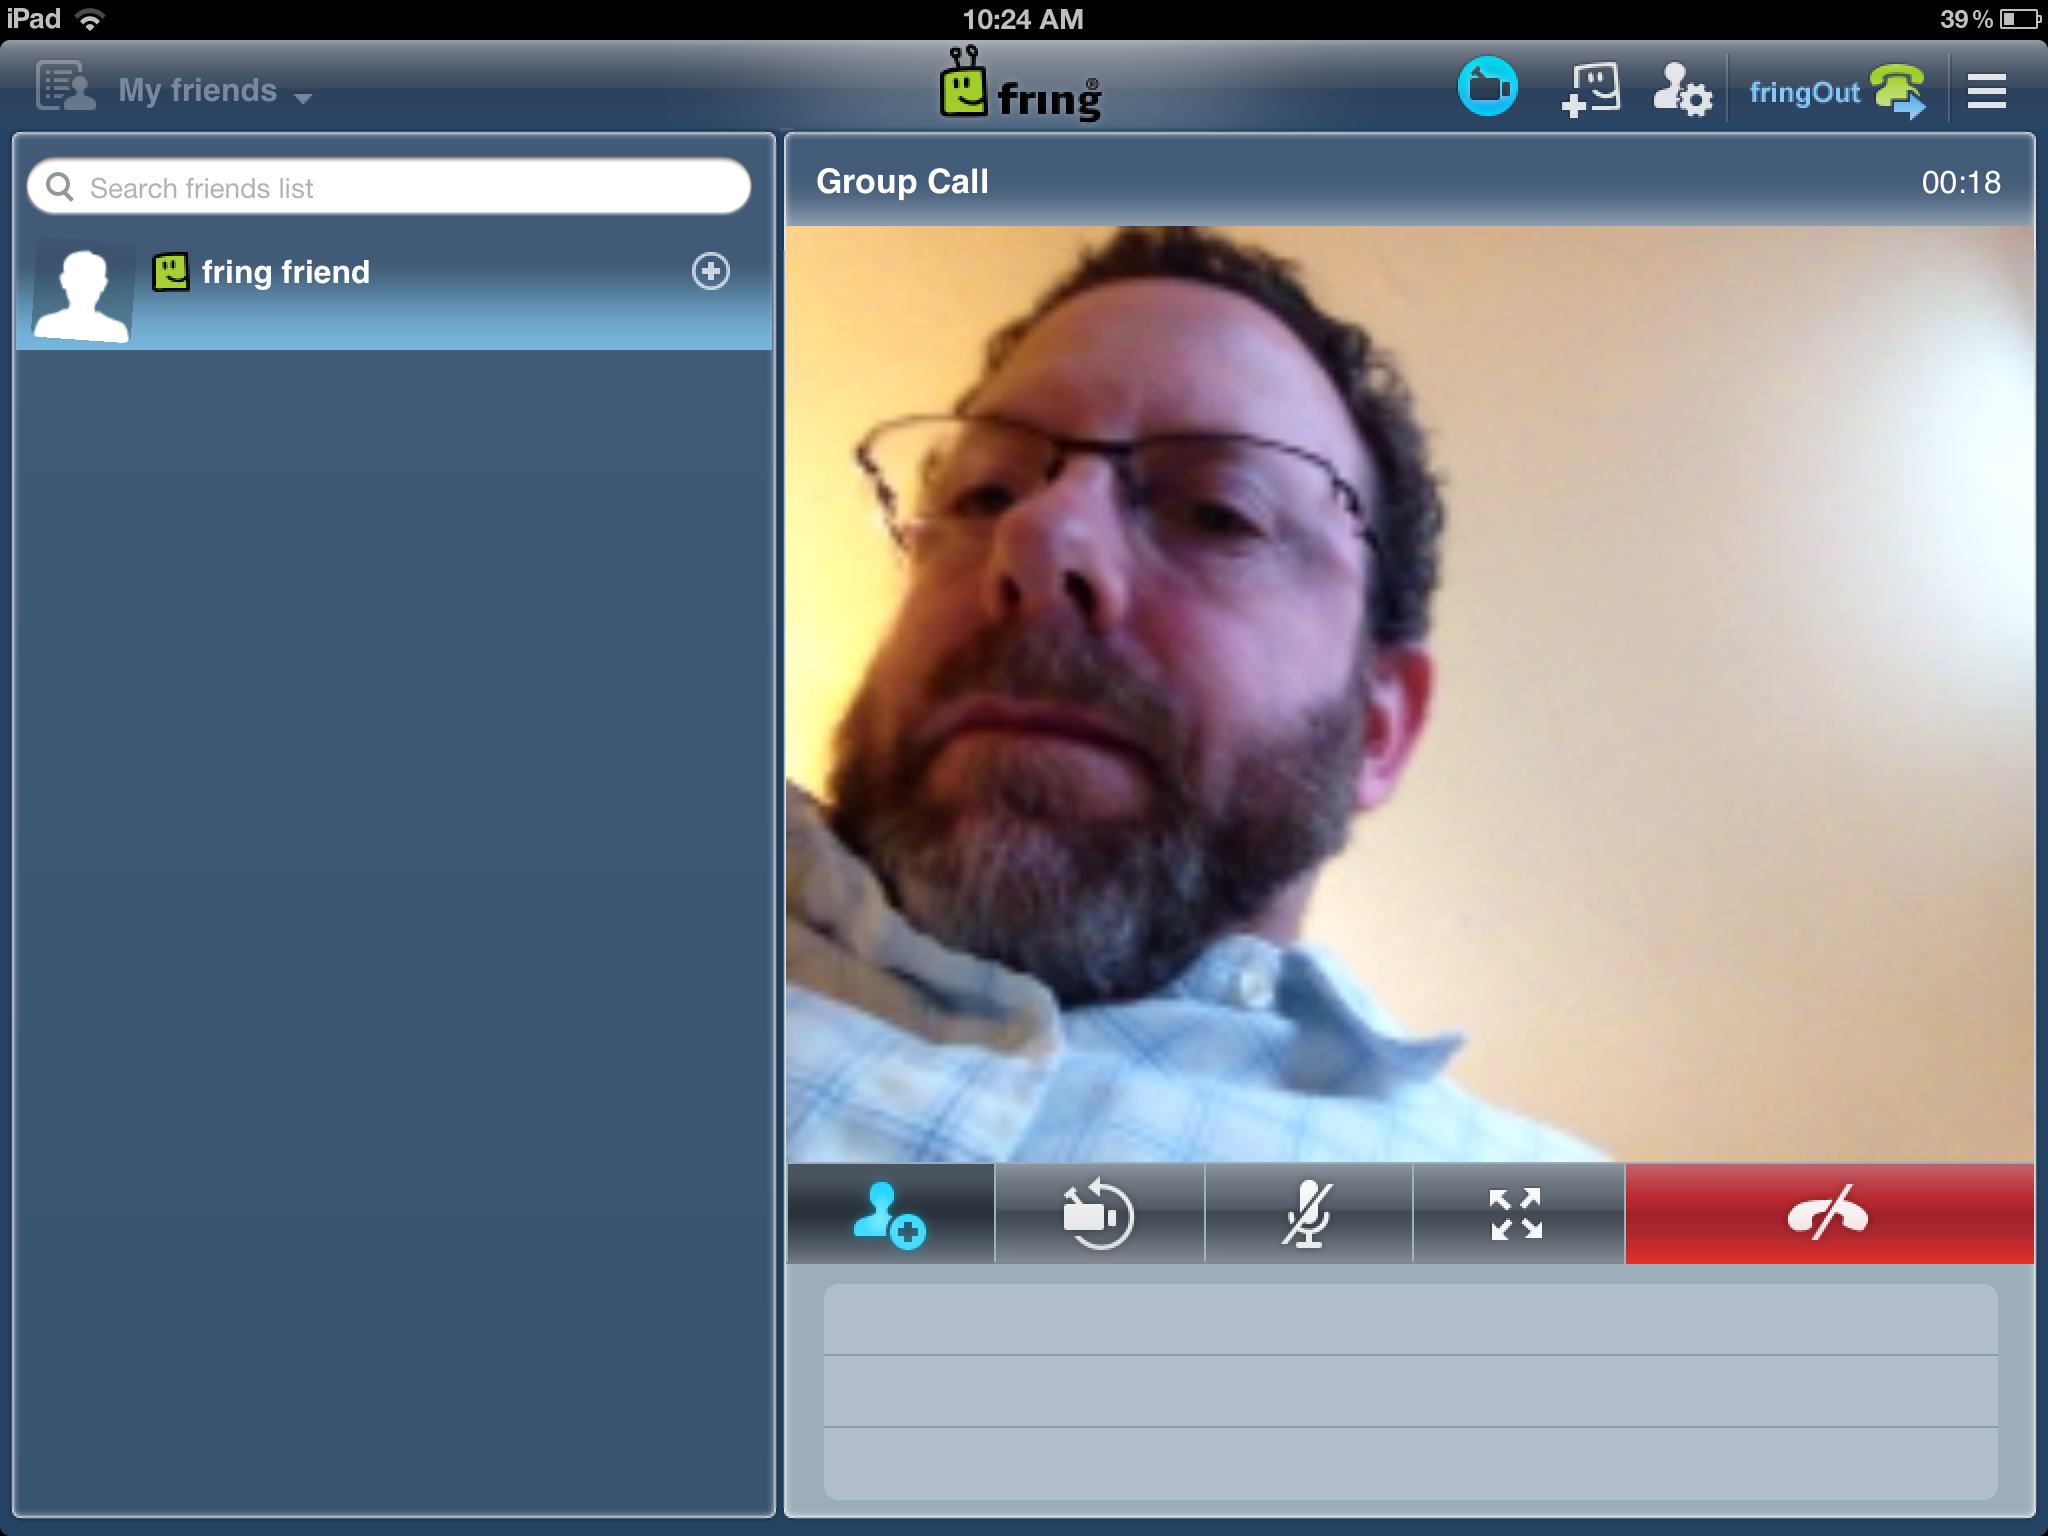 fring group call screen